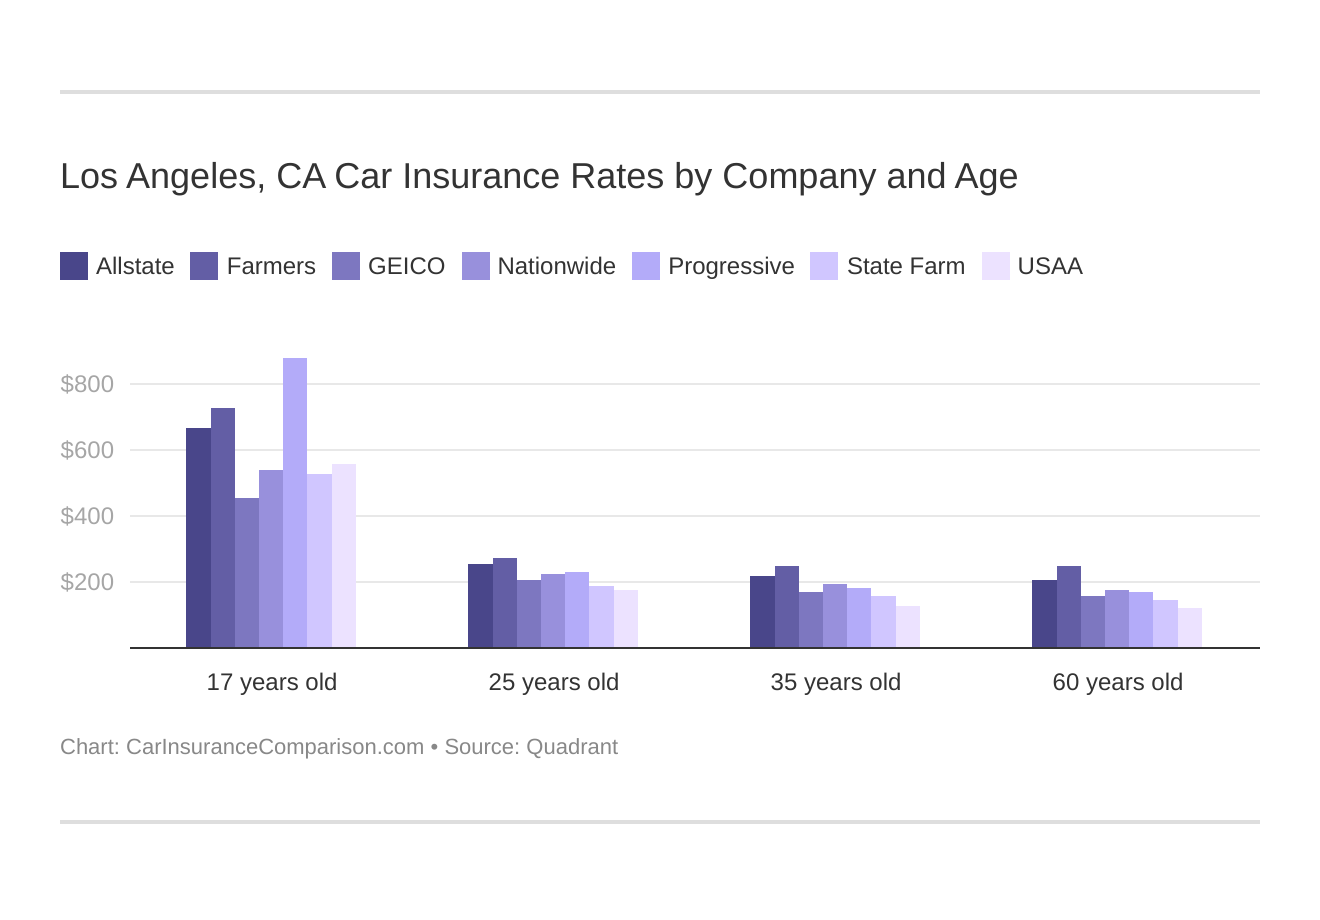 Los Angeles, CA Car Insurance Rates by Company and Age